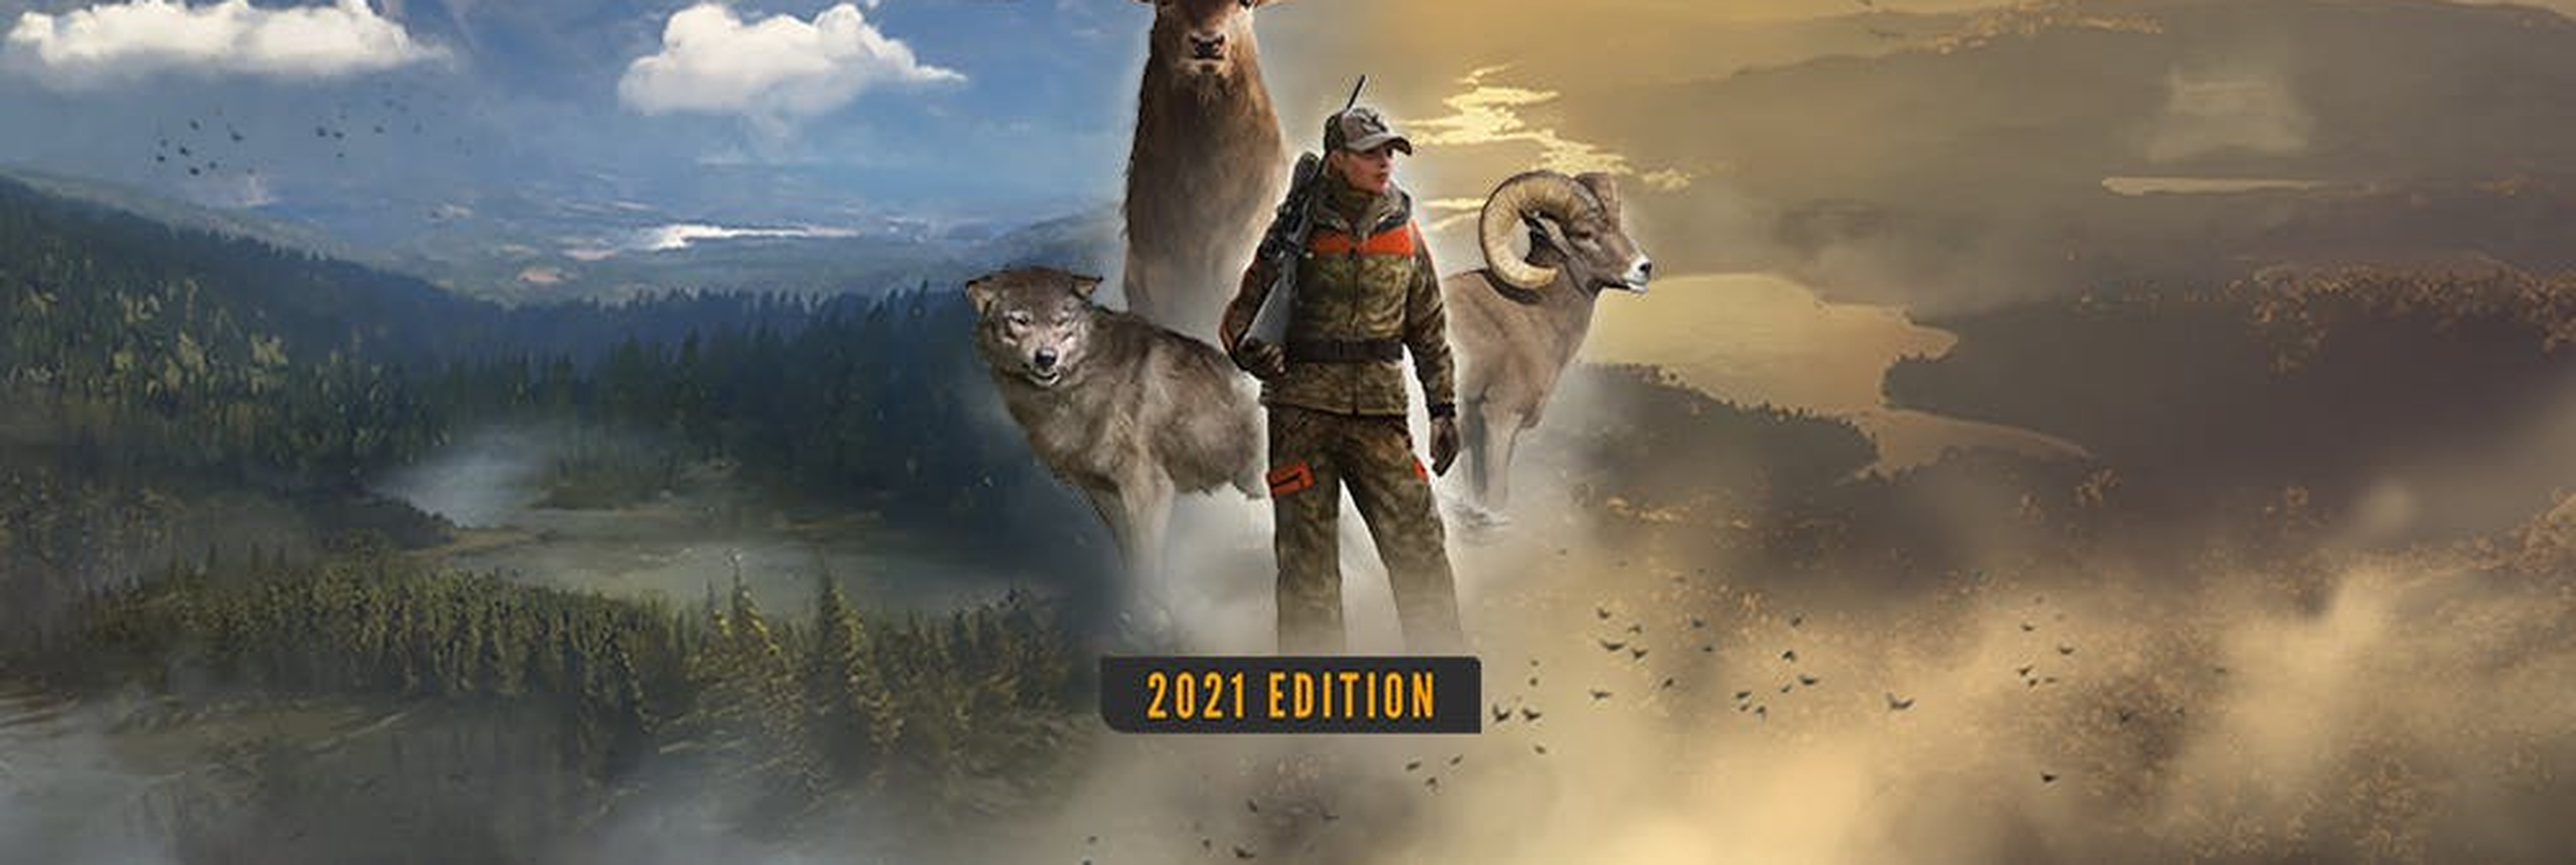 theHunter: Call of the Wild Official Facebook Group